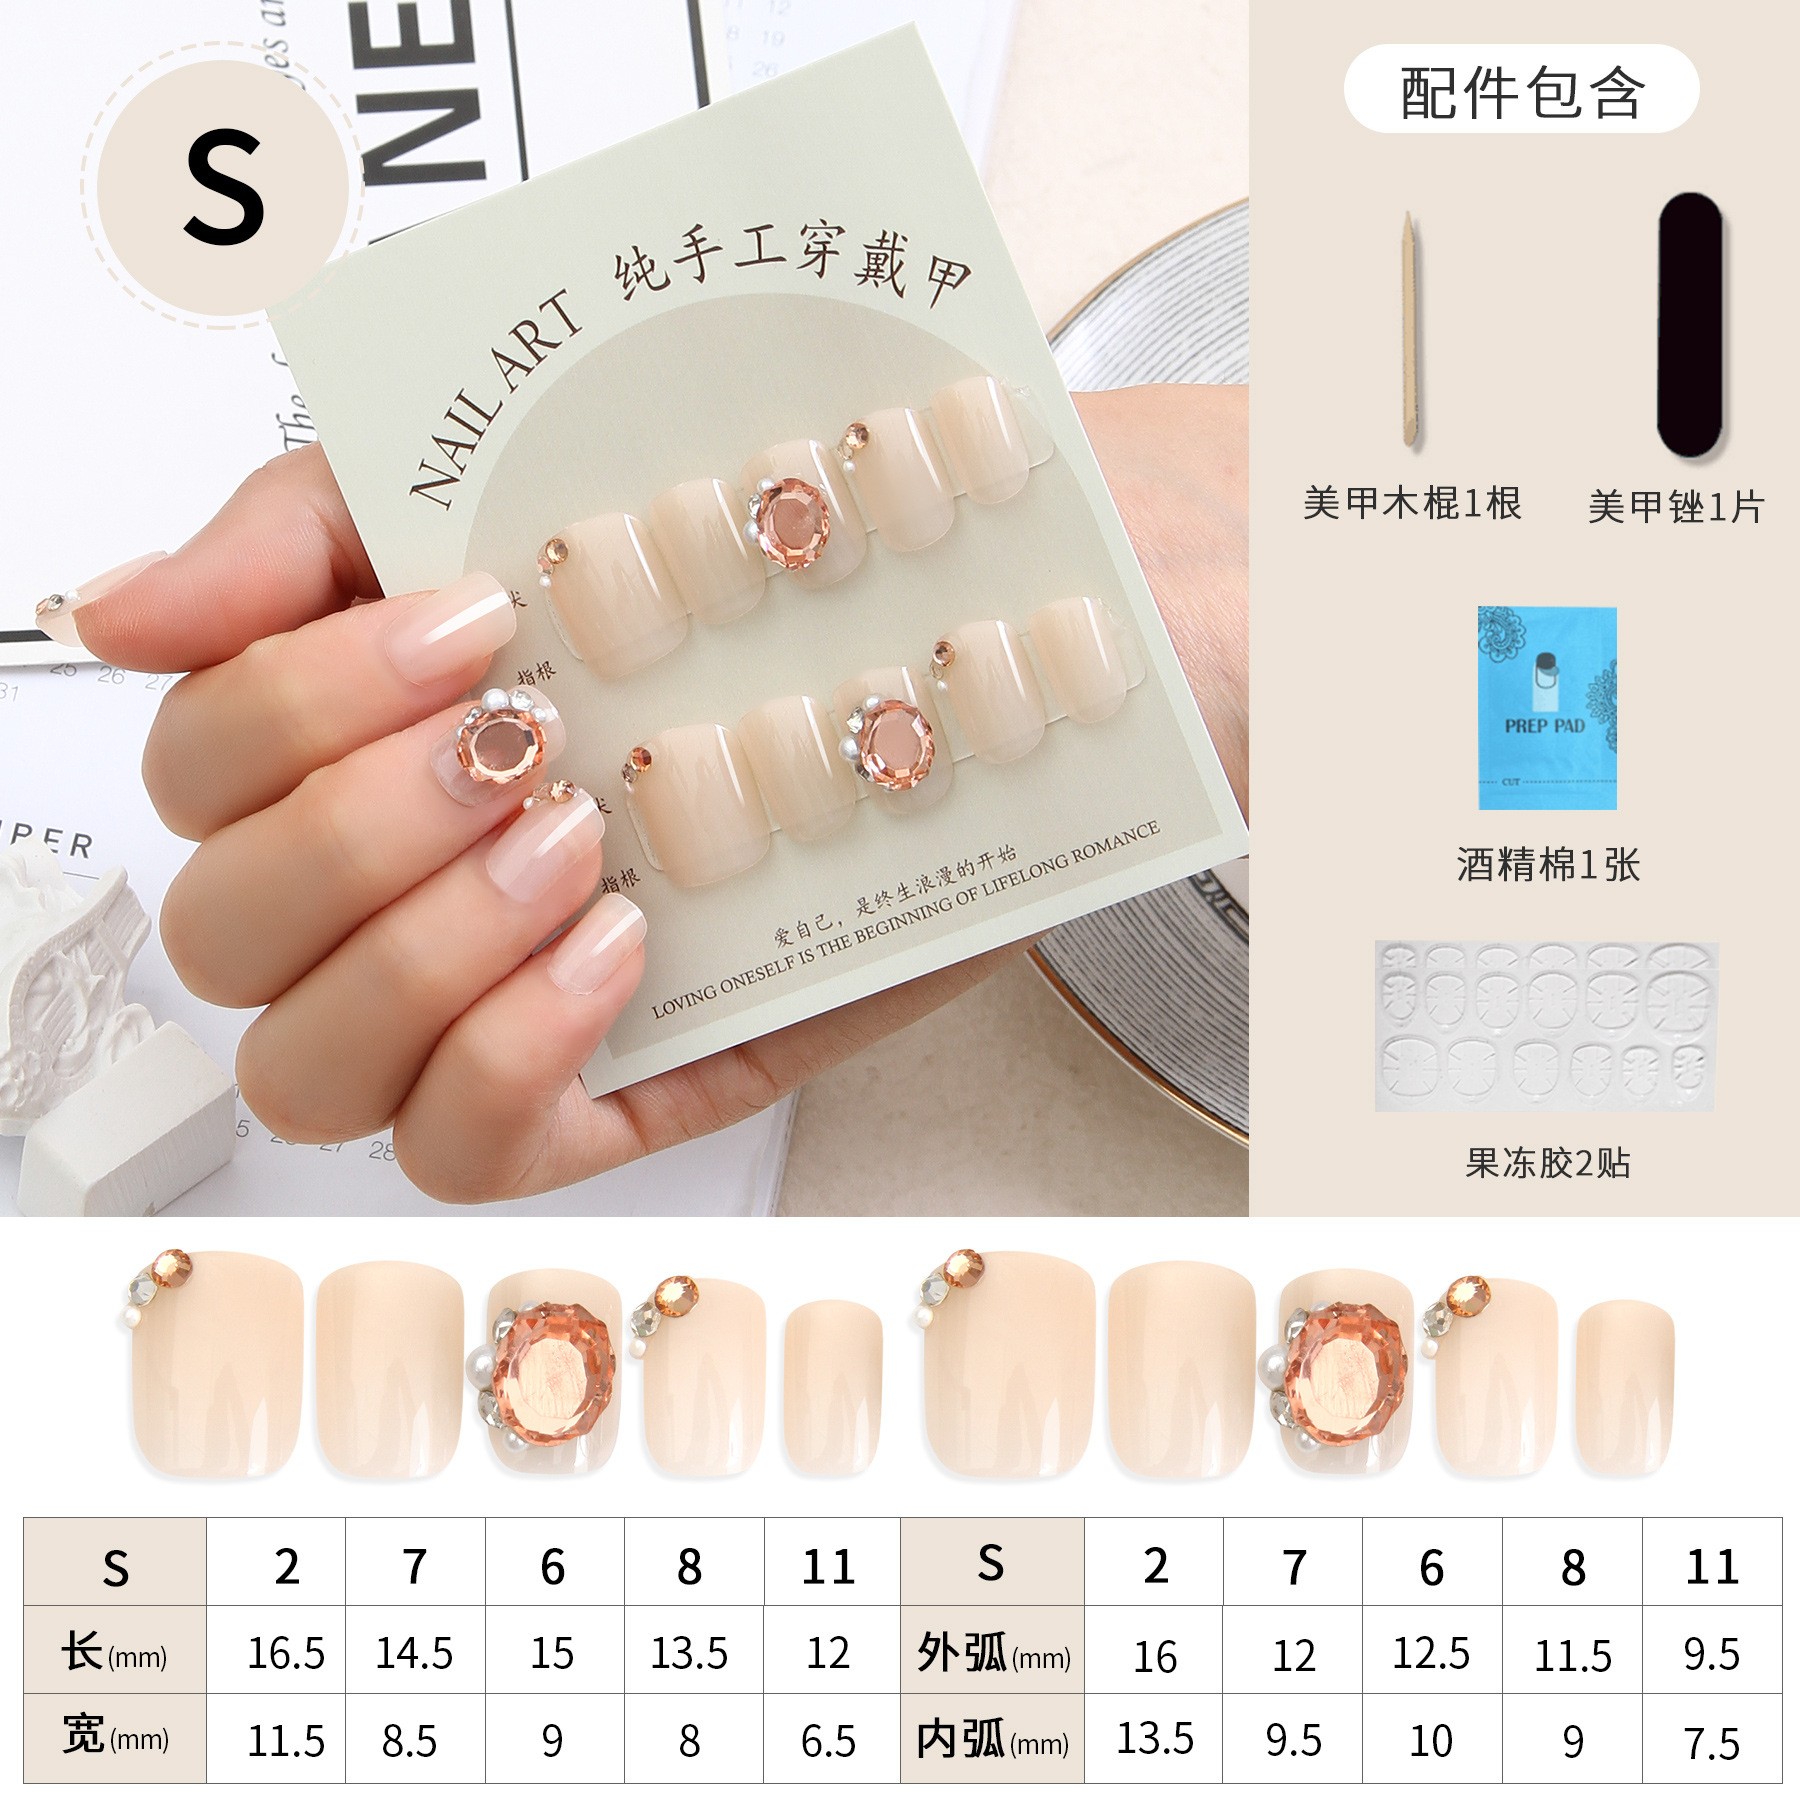 In Stock Hot-Selling New Arrival 10 Pieces Hand-Worn Nail Solid Color Series Small and Short Nail Simple Style Manicure Skin Color Fake Nails